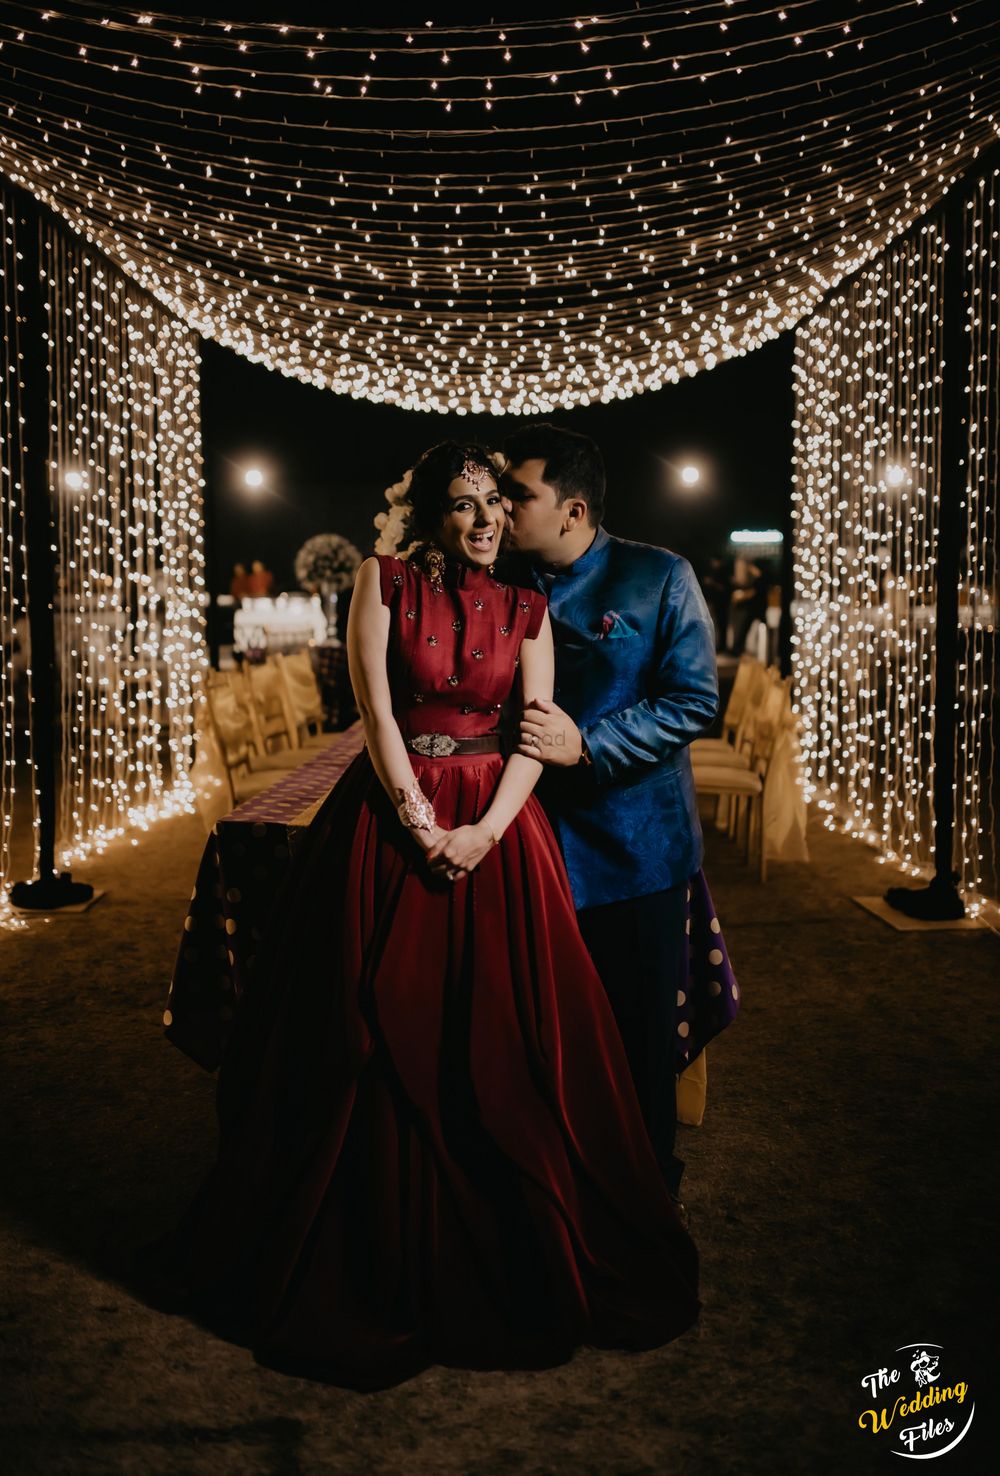 Photo of A cute couple portrait with fairy lights in the backdrop.